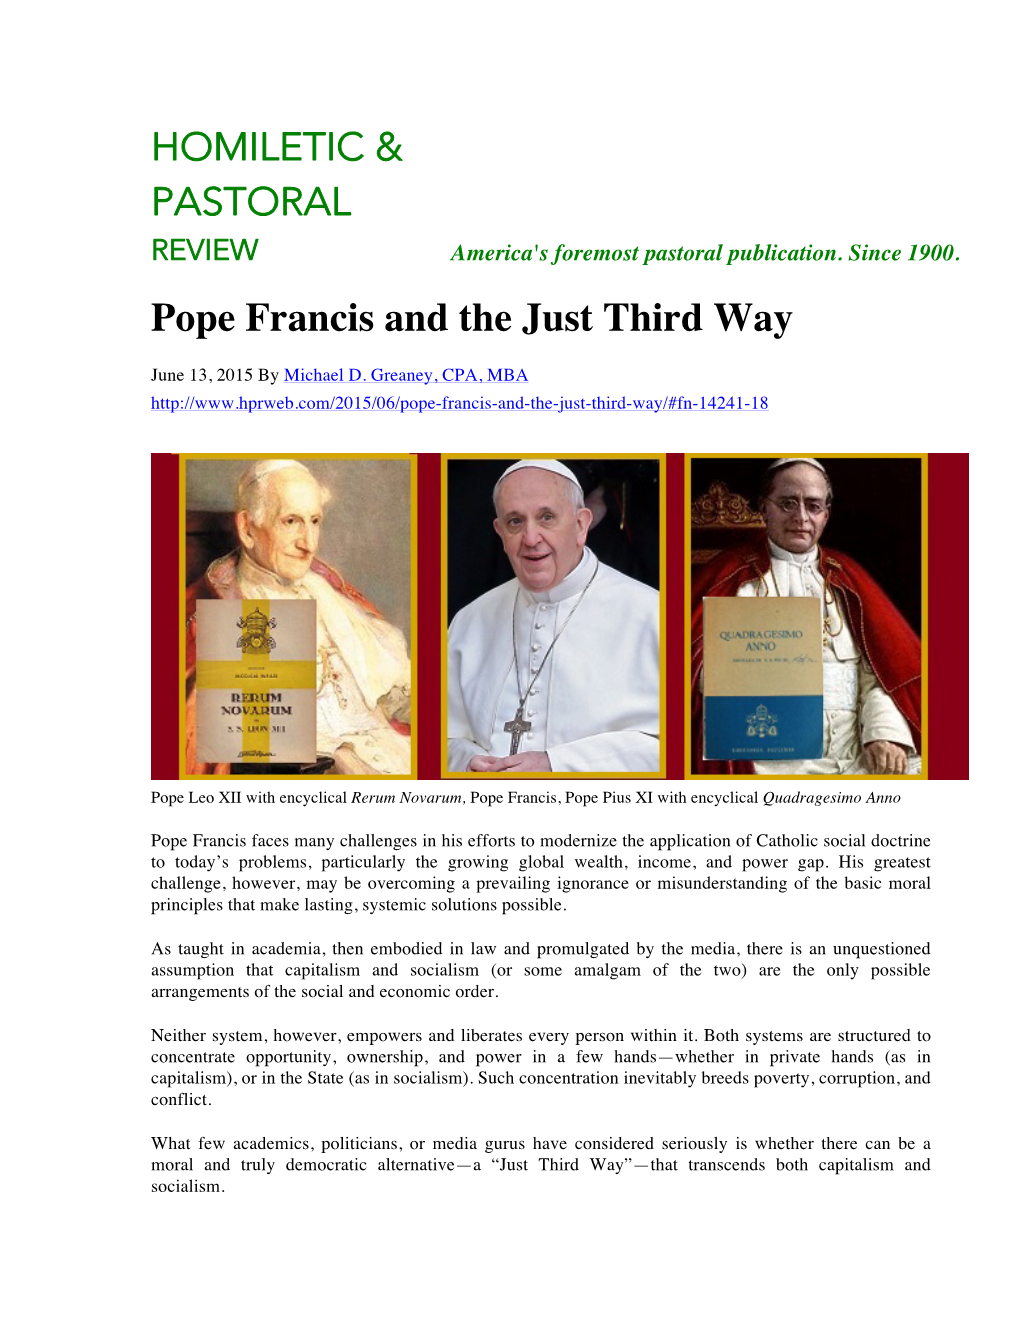 Pope Francis and the Just Third Way